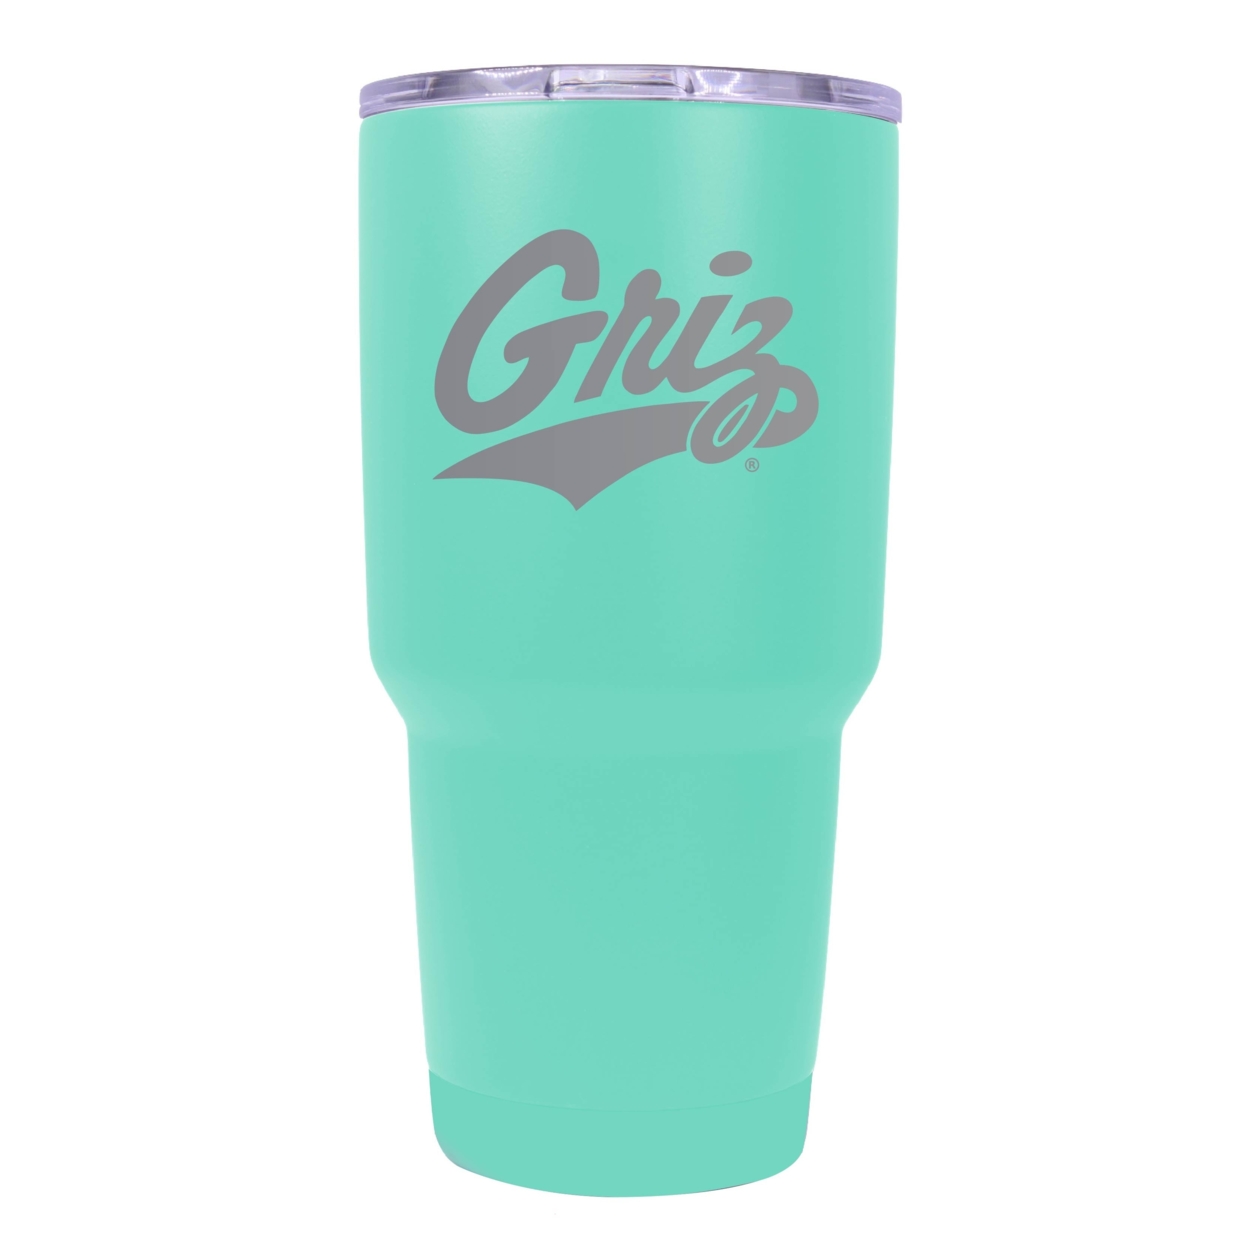 Montana University 24 Oz Laser Engraved Stainless Steel Insulated Tumbler - Choose Your Color. - Seafoam